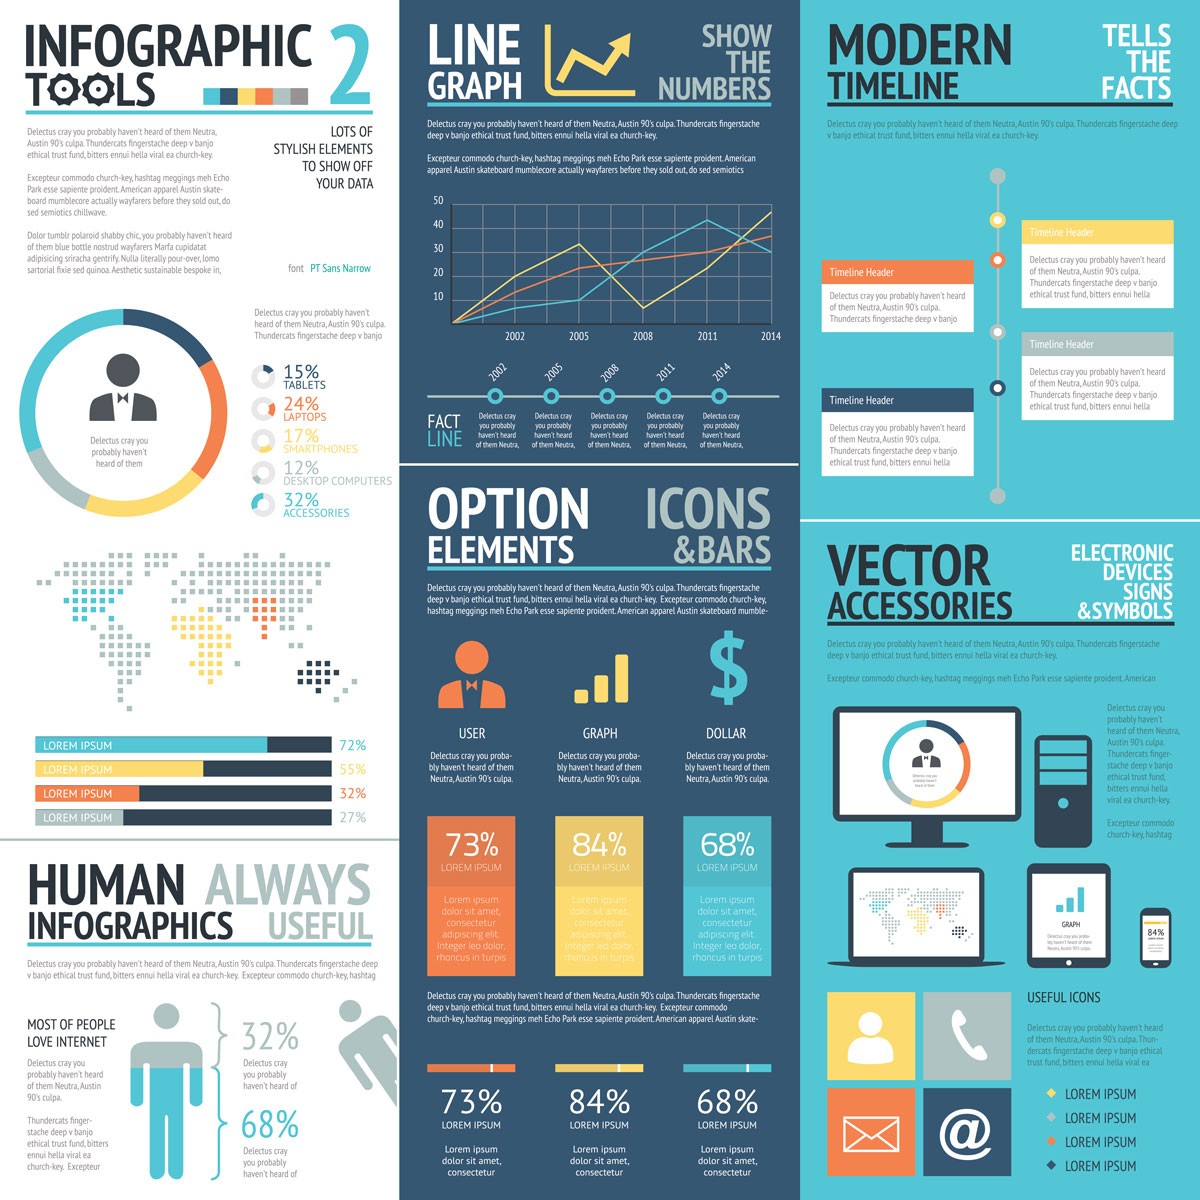 Types of infographics